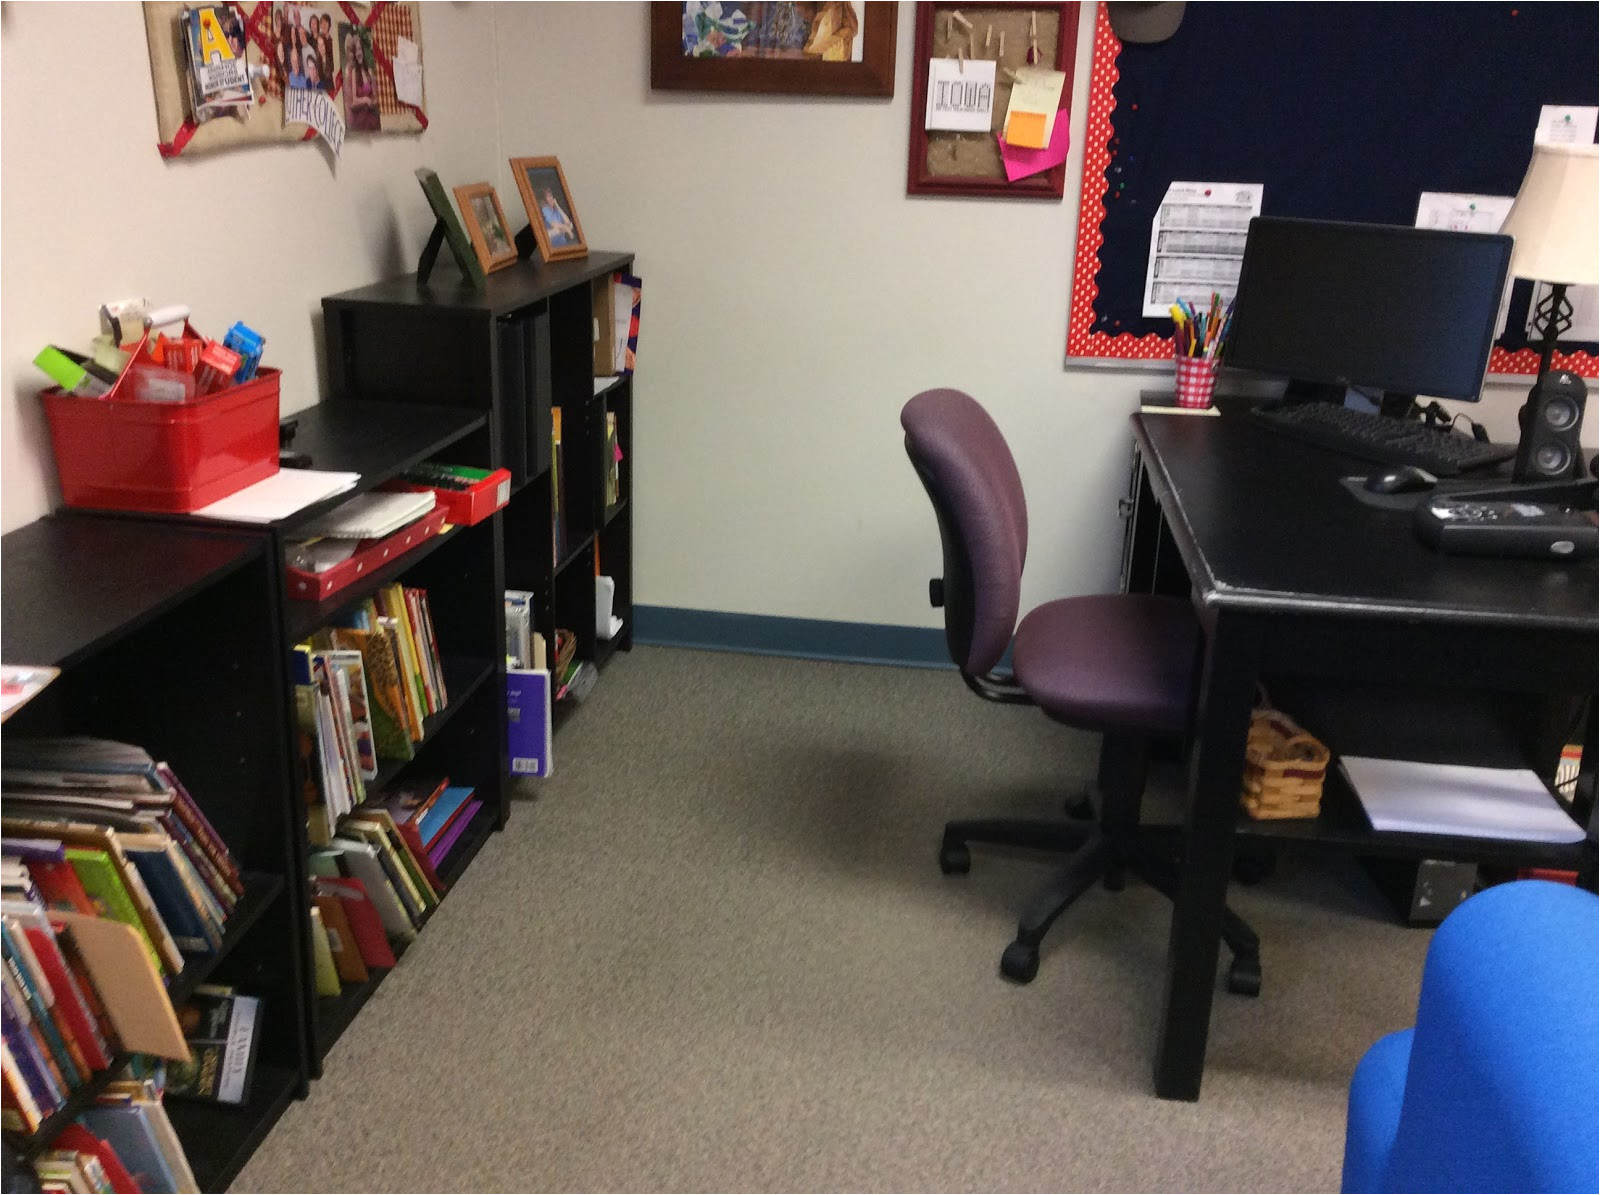 i want to eliminate one of the bookshelves behind my desk simplify even more the red bucket on the shelf behind my desk is my supply box